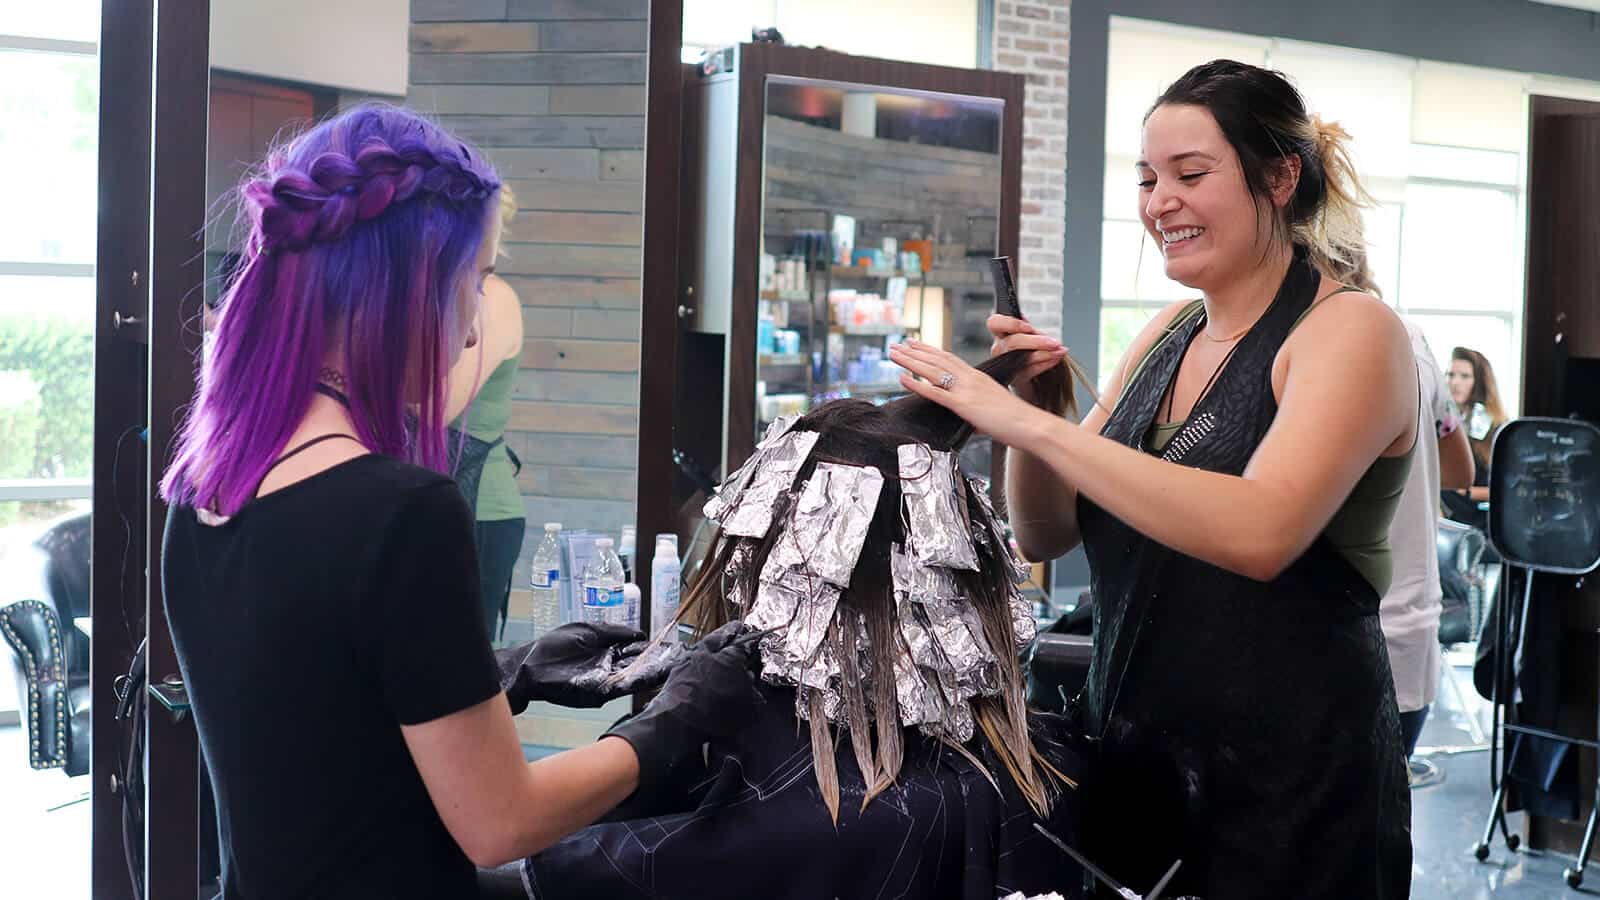 Our stylist and her assistant touching up the color on their client